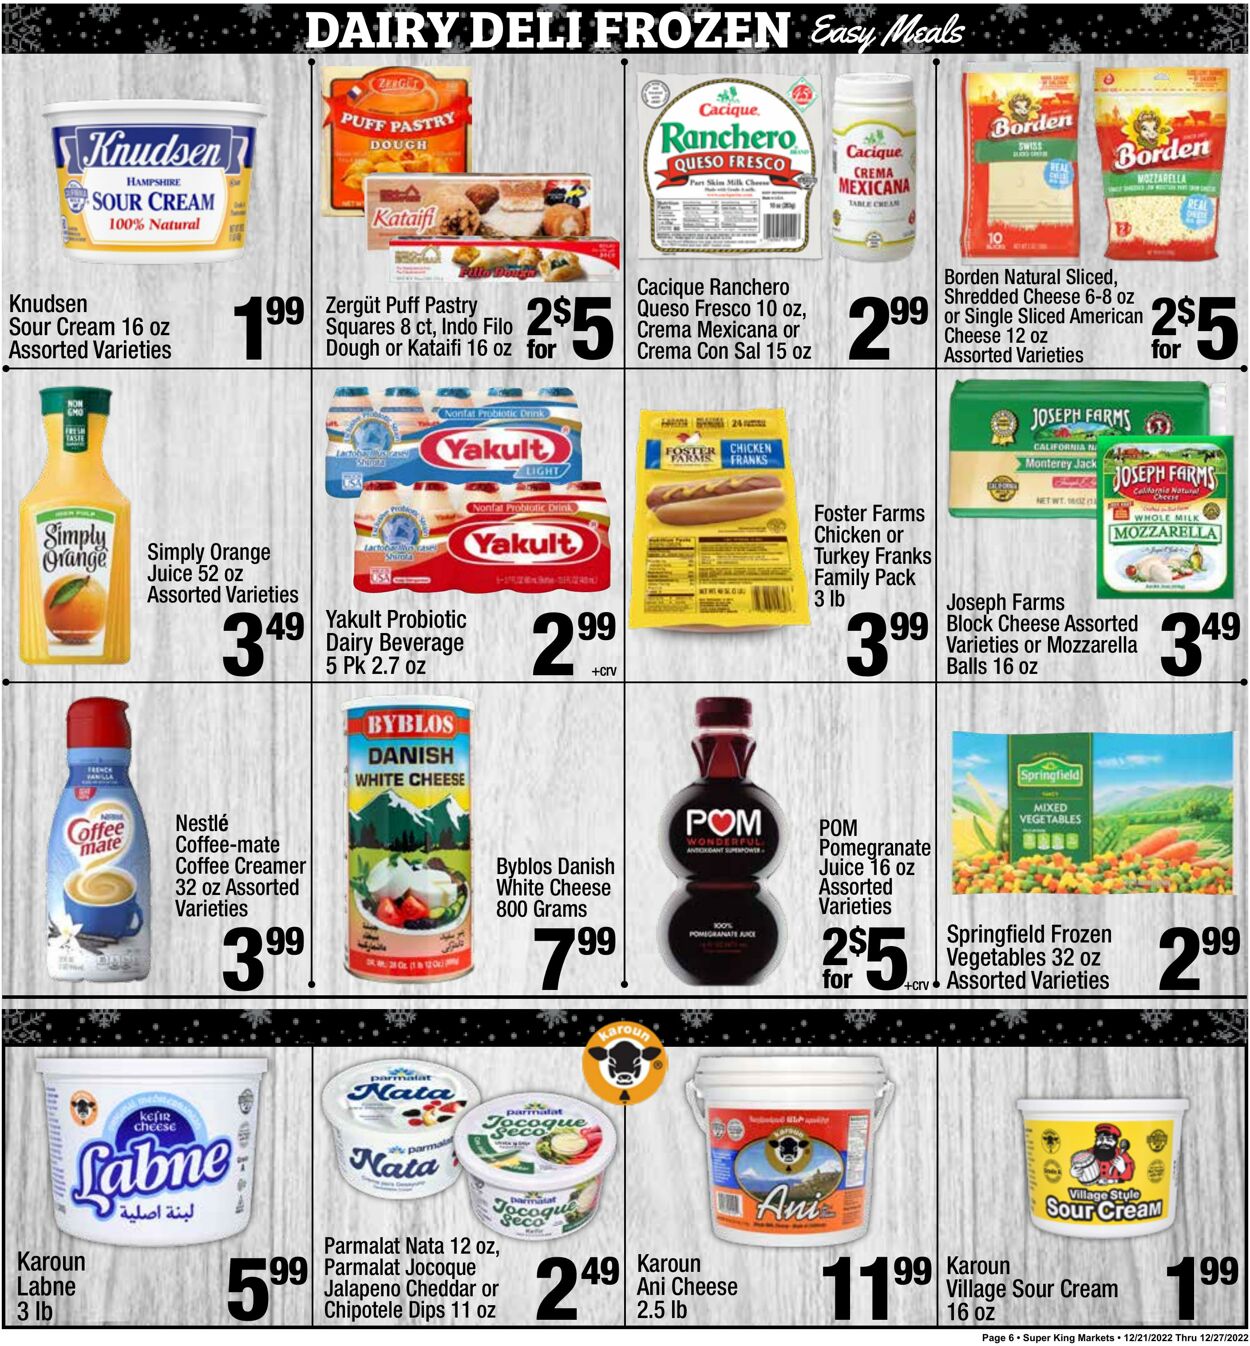 Weekly ad Super King Markets 12/21/2022 - 12/27/2022